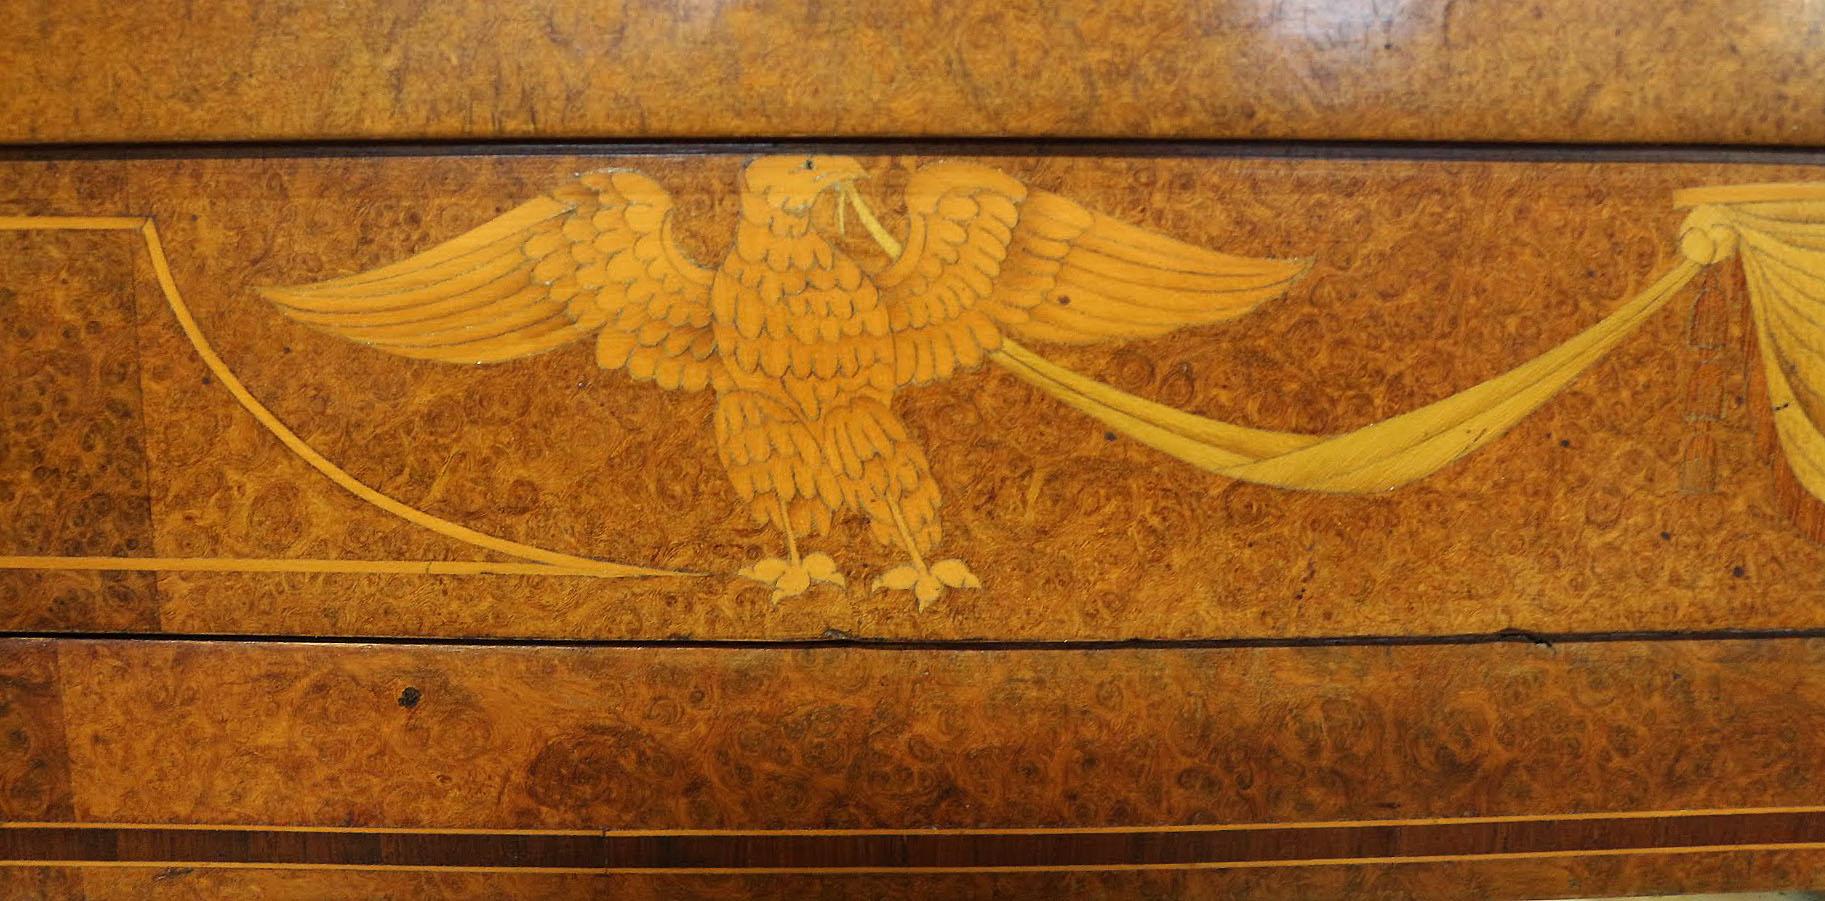 19th century armoire French Second Empire inlaid Eagles Ormolu
Birds eye maple
Unusual lion paw feet
Stunning and impressive
Mirror doors
In very good condition for its age
This will take a sideways hanging rail if required 46cms 18.11ins